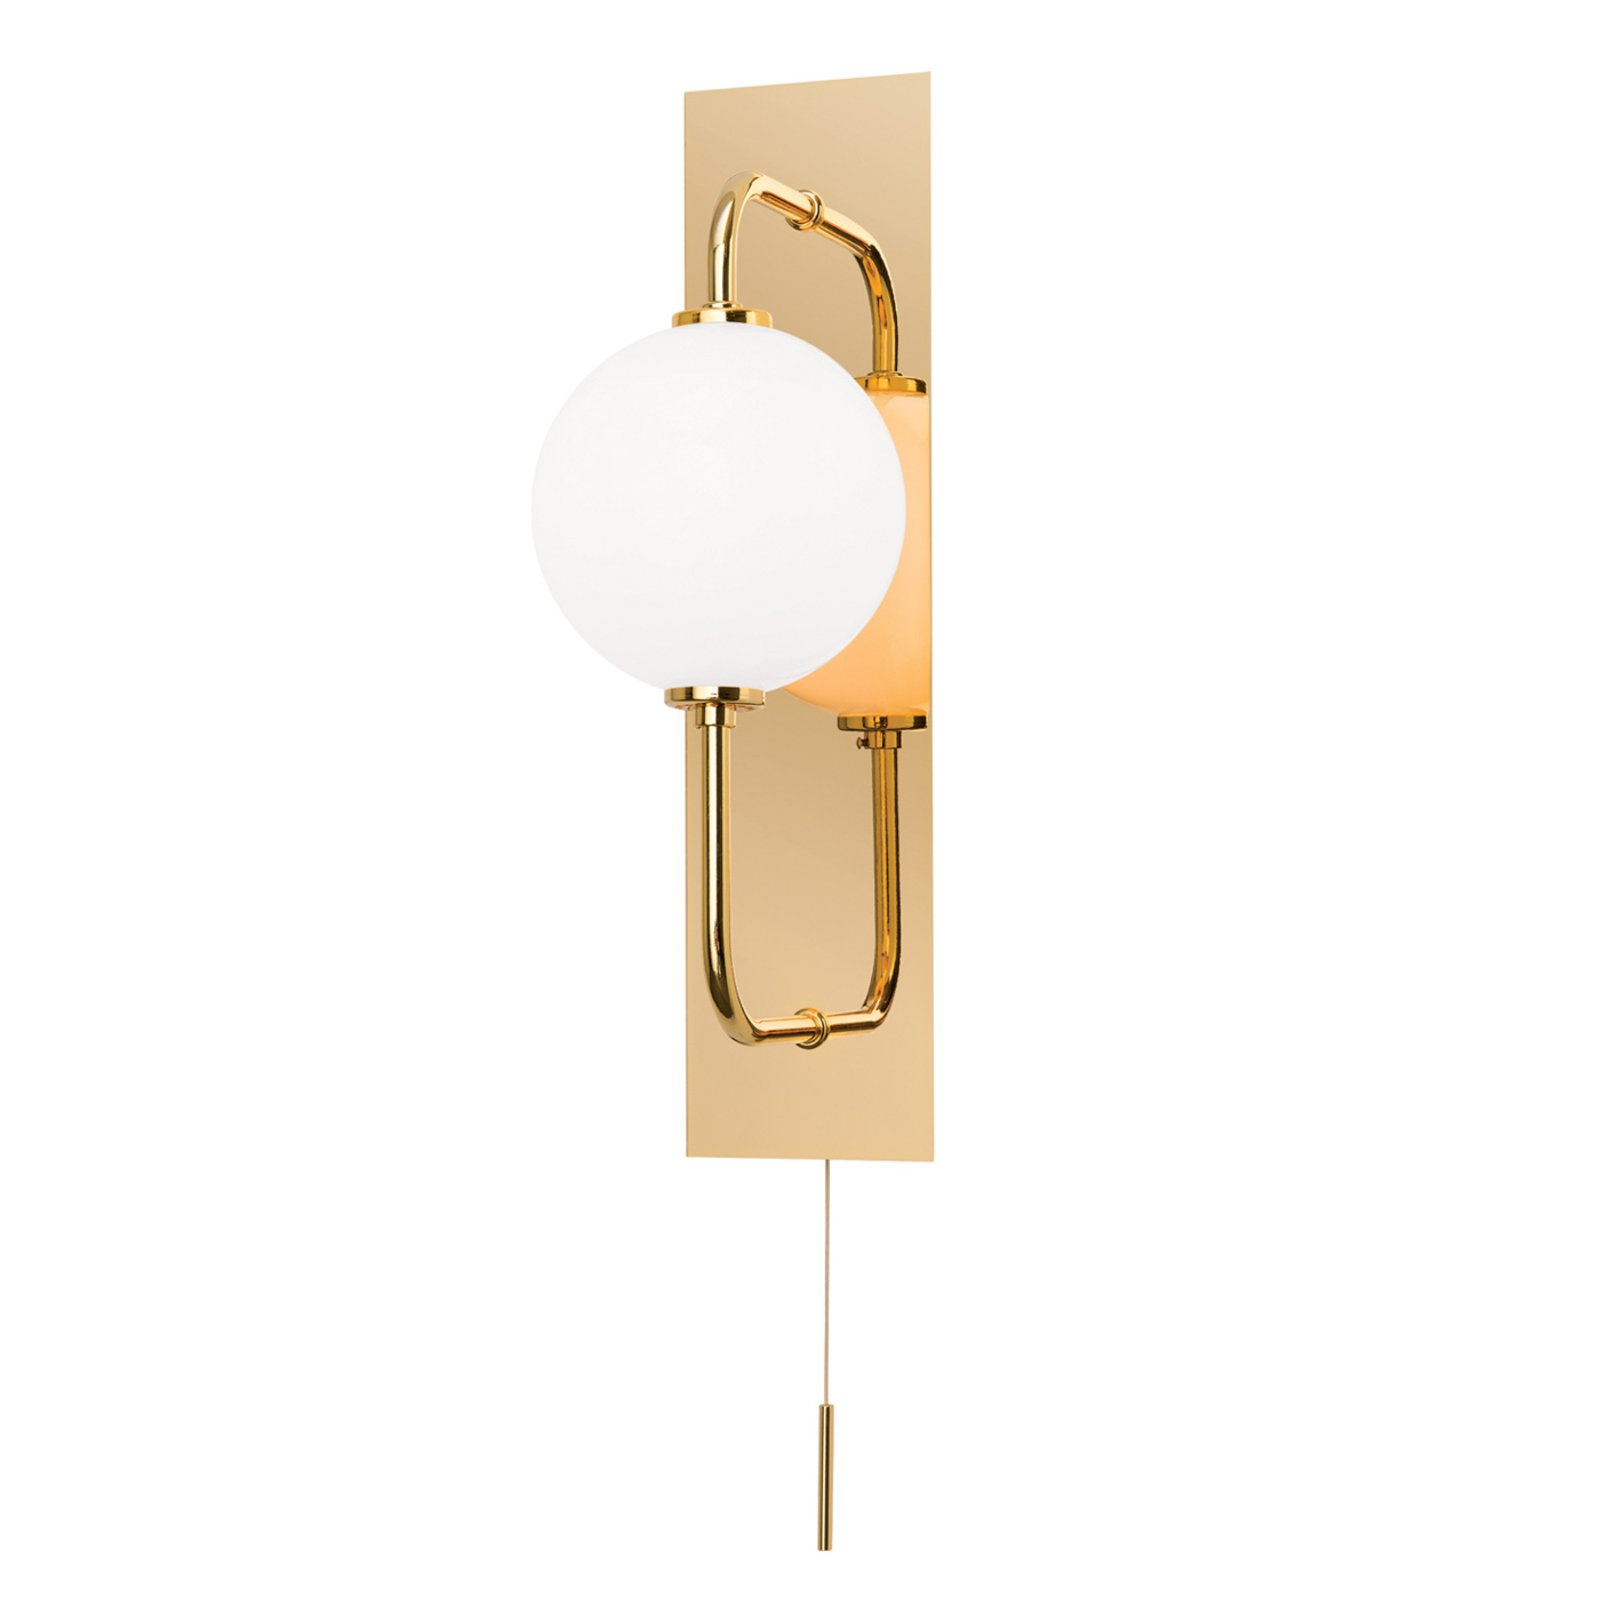 Pipes LED wall light in glossy gold